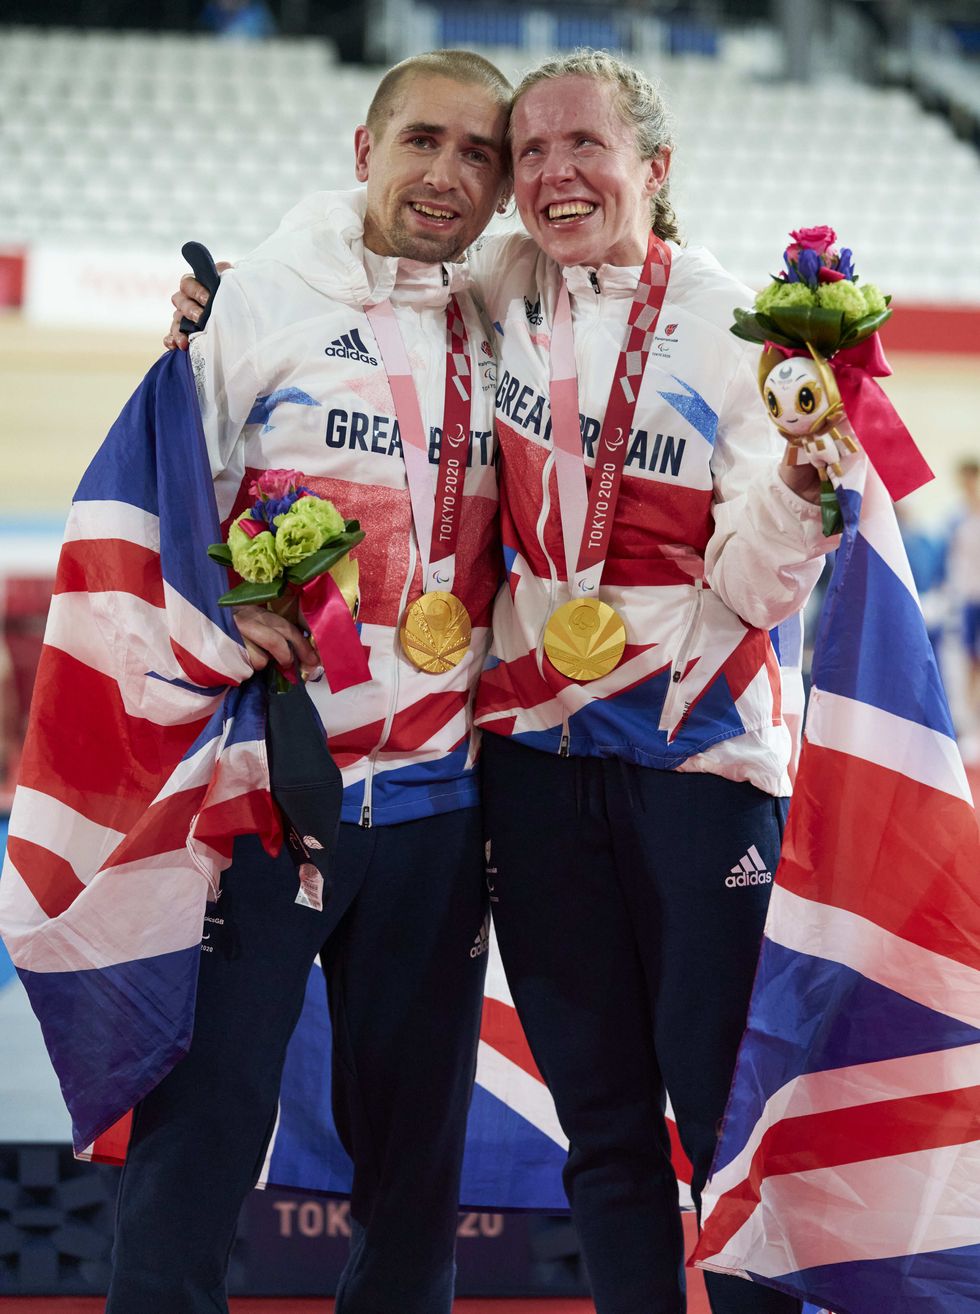 ParalympicsGB Cyclists, Lora Fachie celebrating gold medal with husband Neil Fachie.